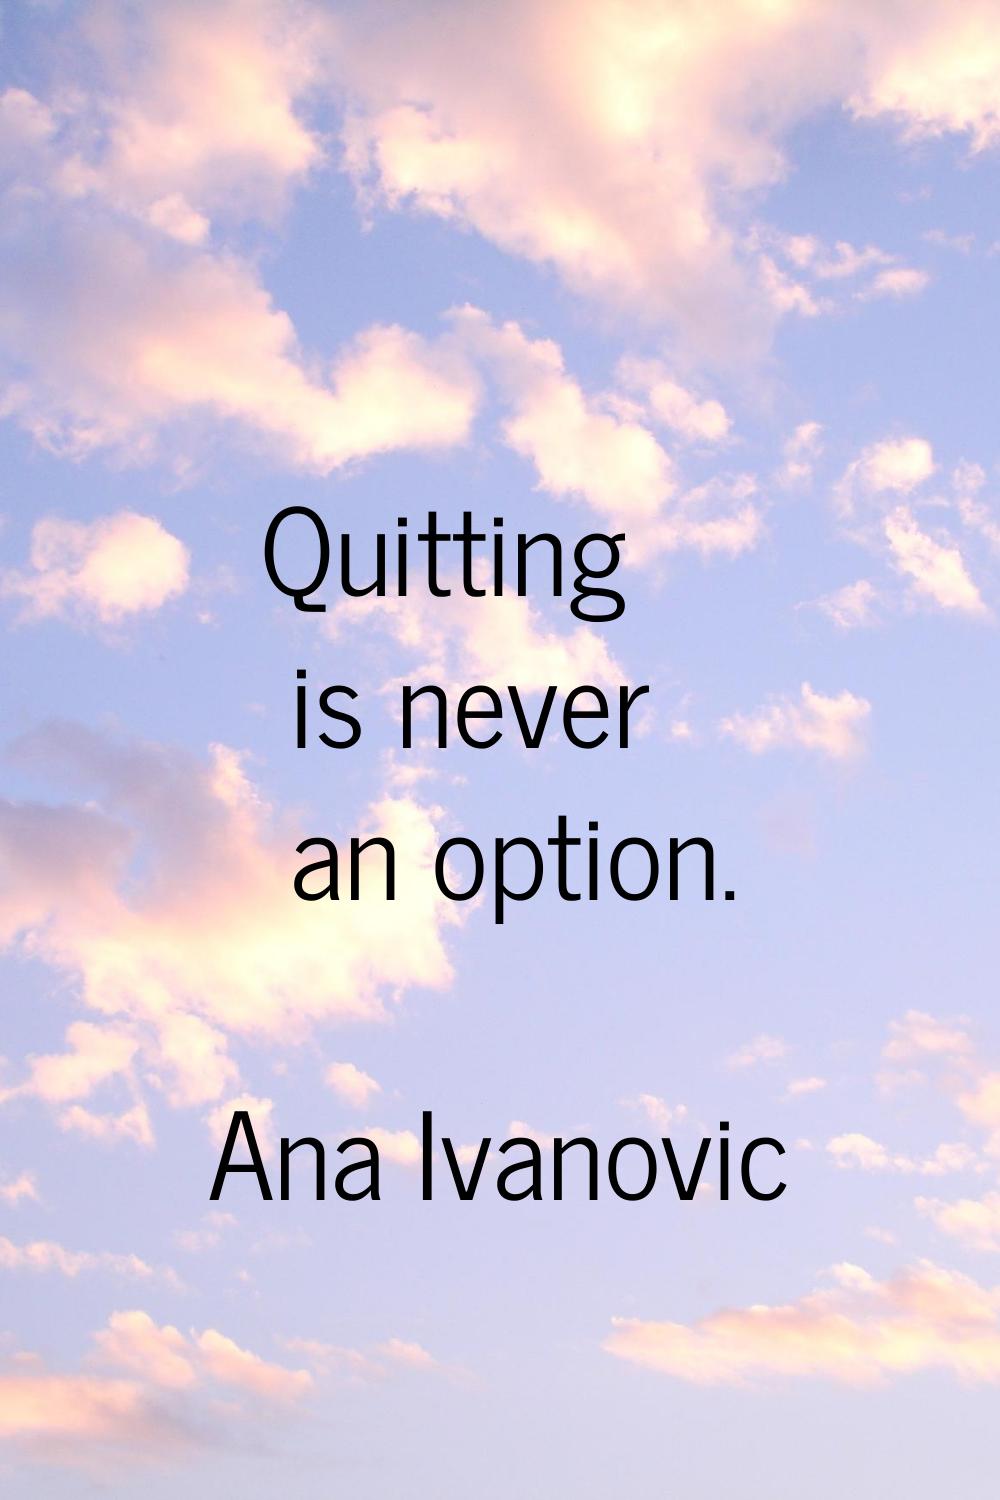 Quitting is never an option.